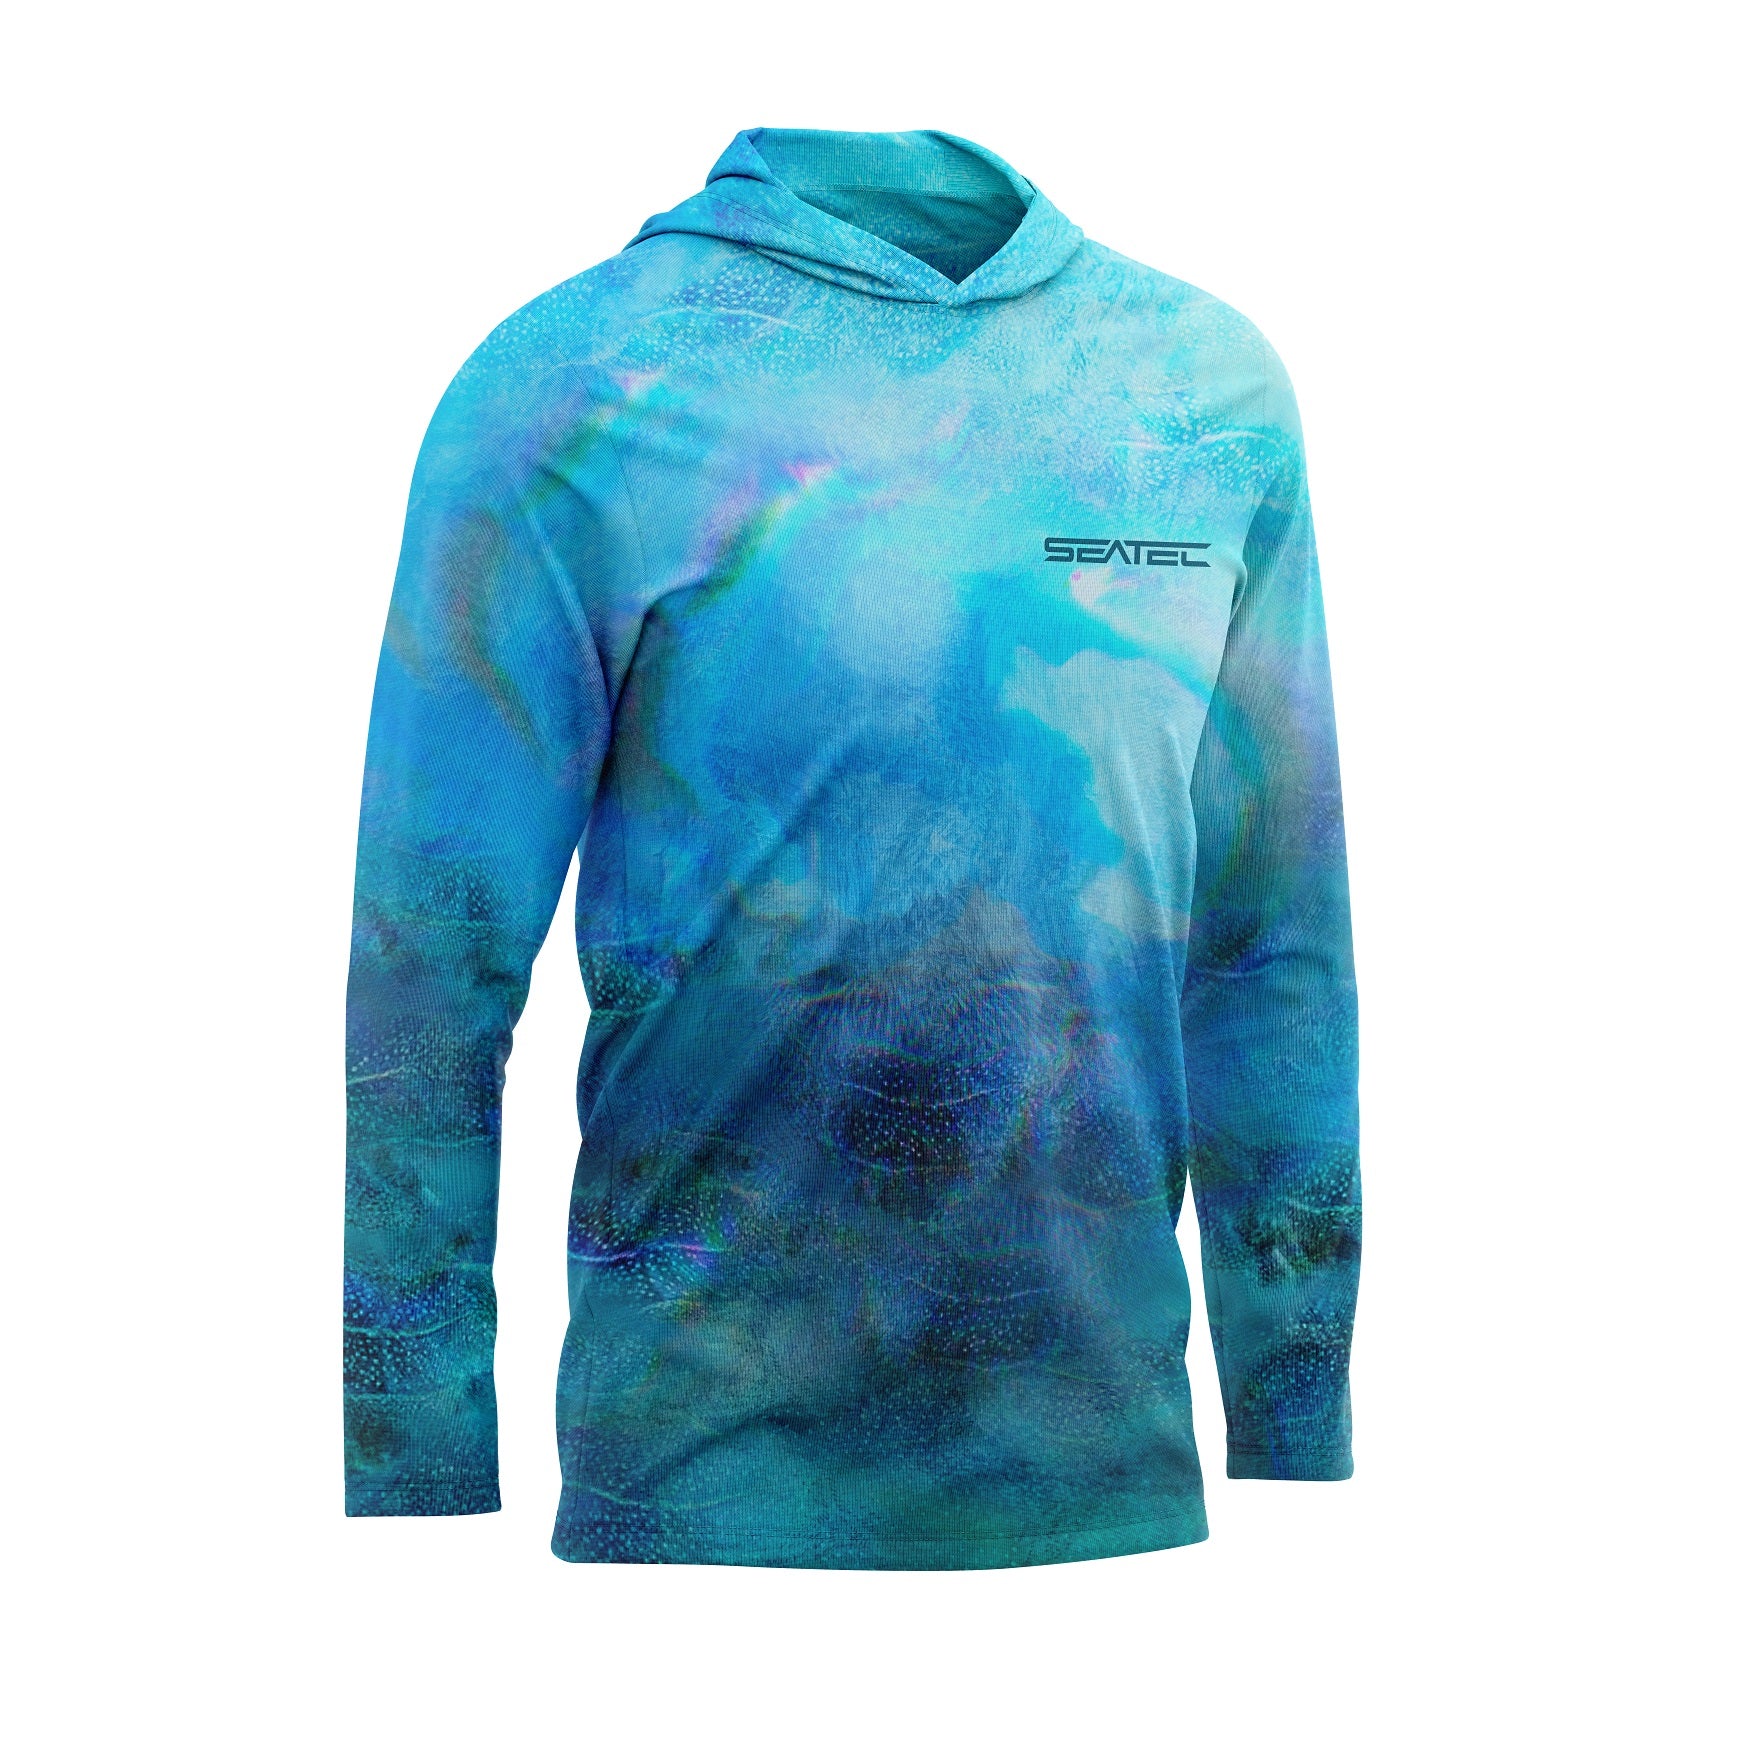 Performance Fishing Hoodie - Blue Trevally Hooded Shirt - UPF 50+, Snag Resistant, Sun Shirt - Best Fishing Apparel - XL - Seatec Outfitters